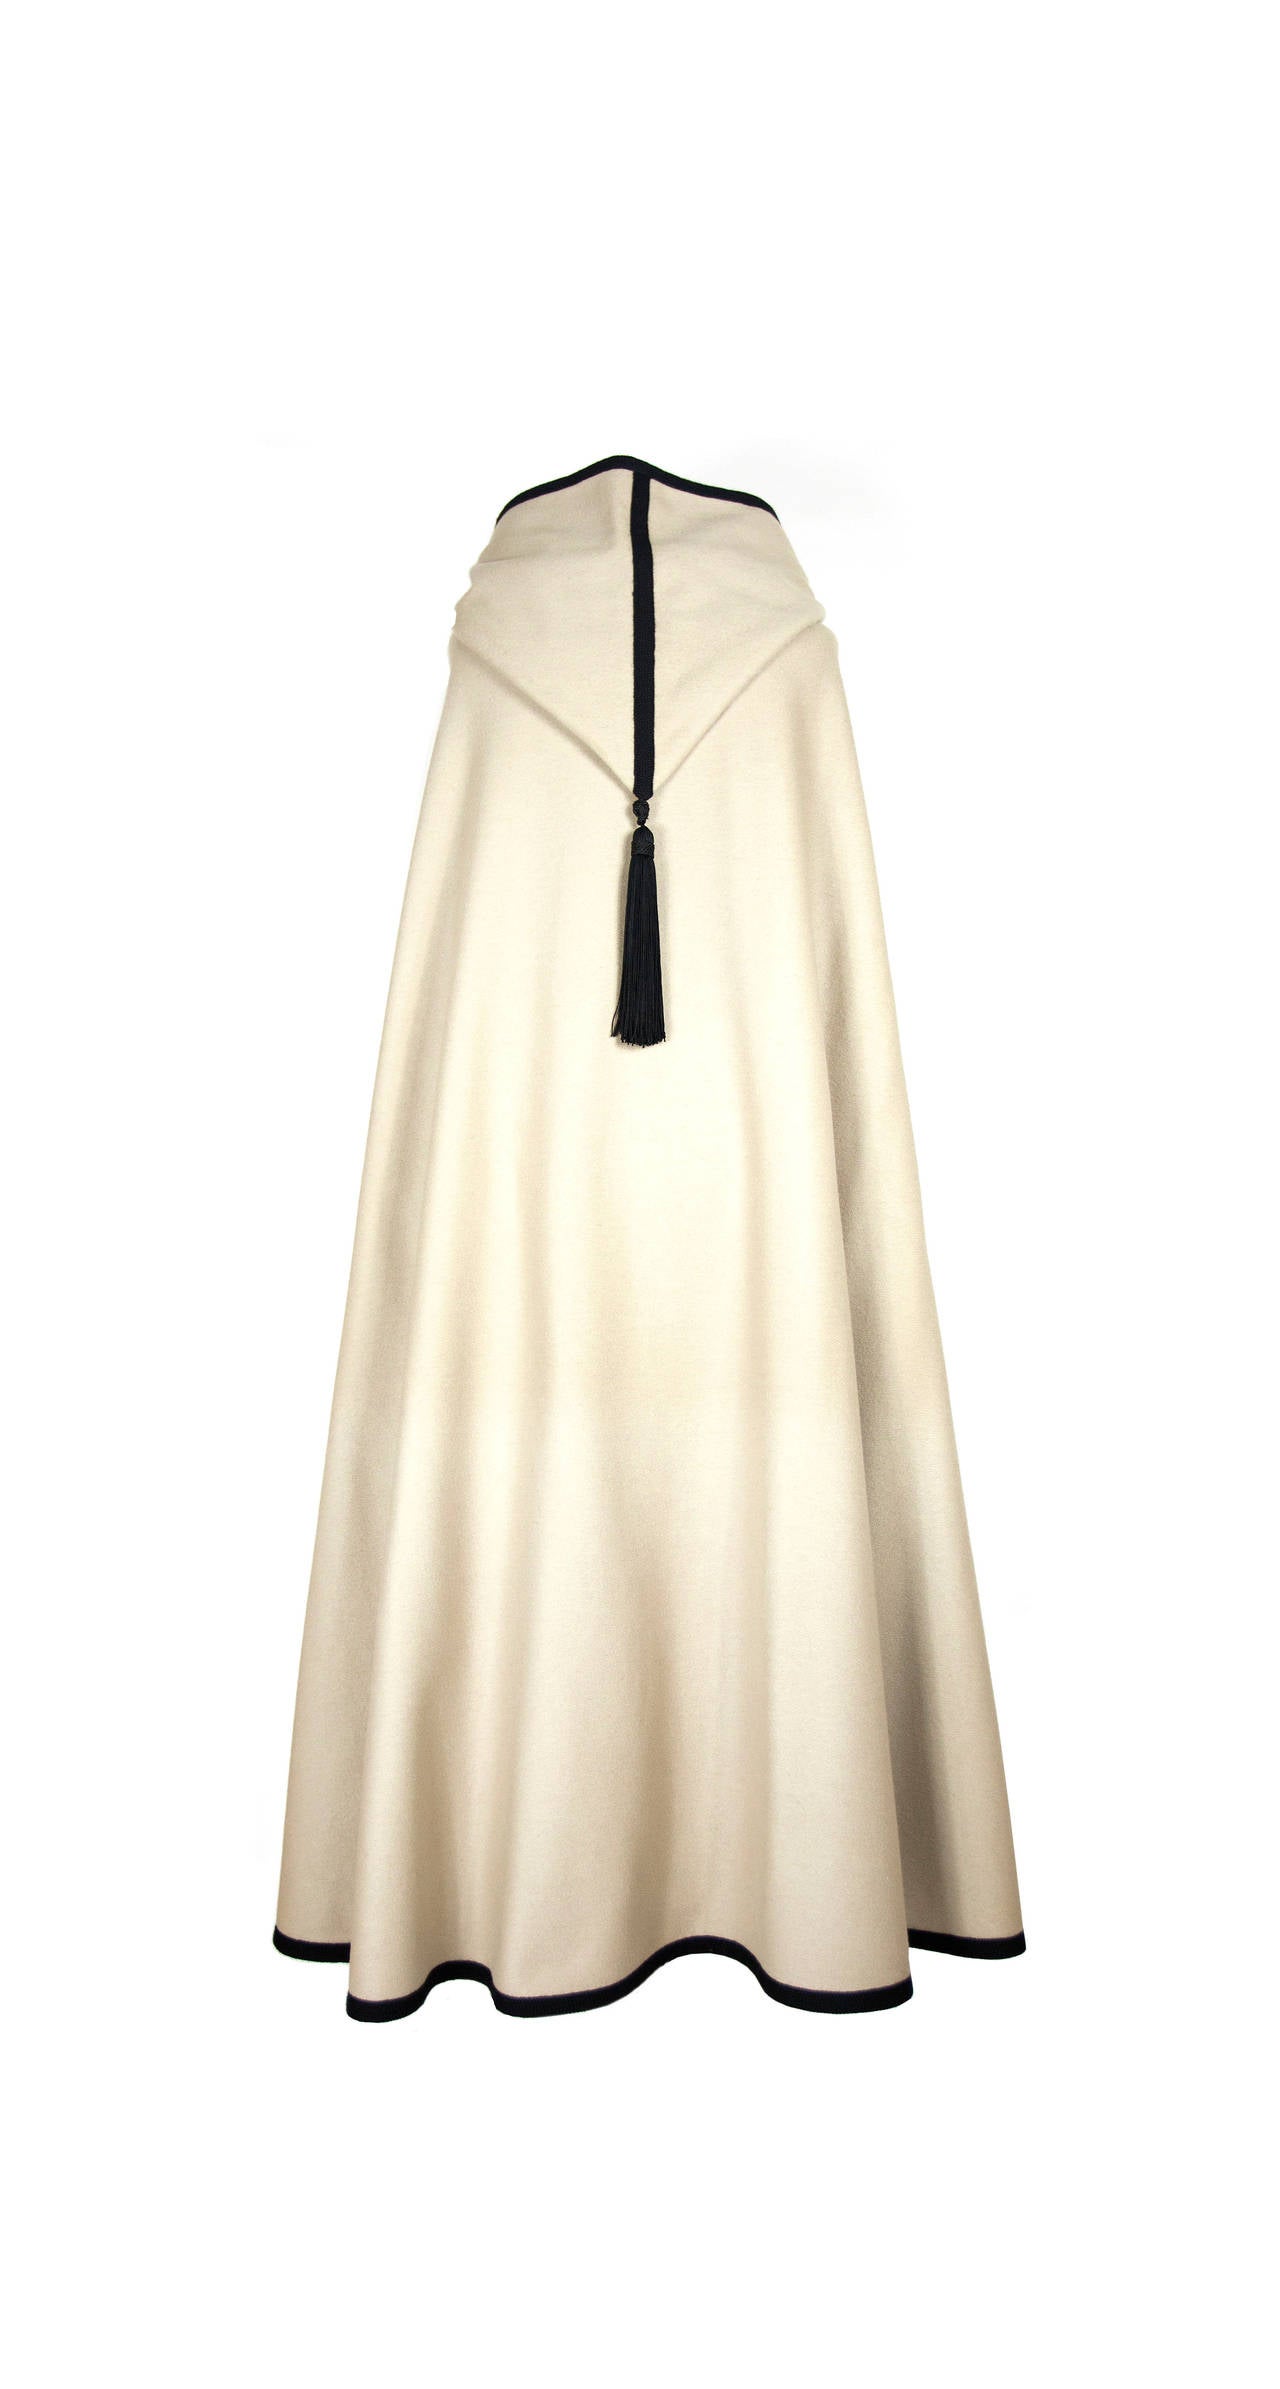 Vintage Saint Laurent Rive Gauche 1970's Loden cream cape. Cape is trimmed in a wide black braid with passementerie closures and a large tassel. Hood is oversized and has a large black tassel at its point as well. This is an iconic shape from Saint